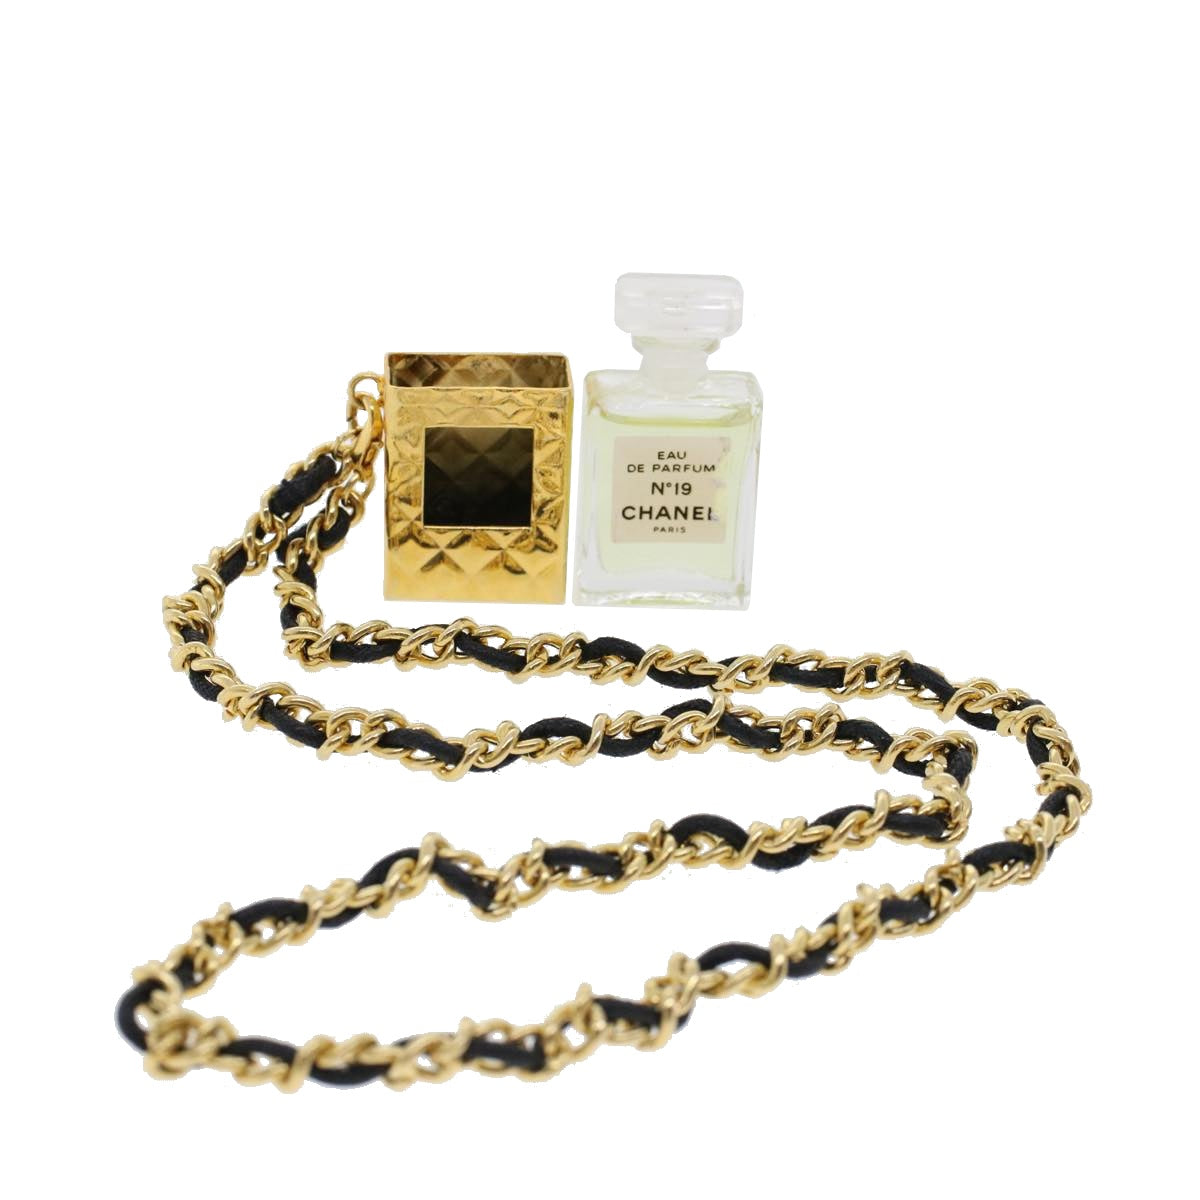 CHANEL Chain Necklace Perfume No.19 Gold Tone CC Auth ar9524B